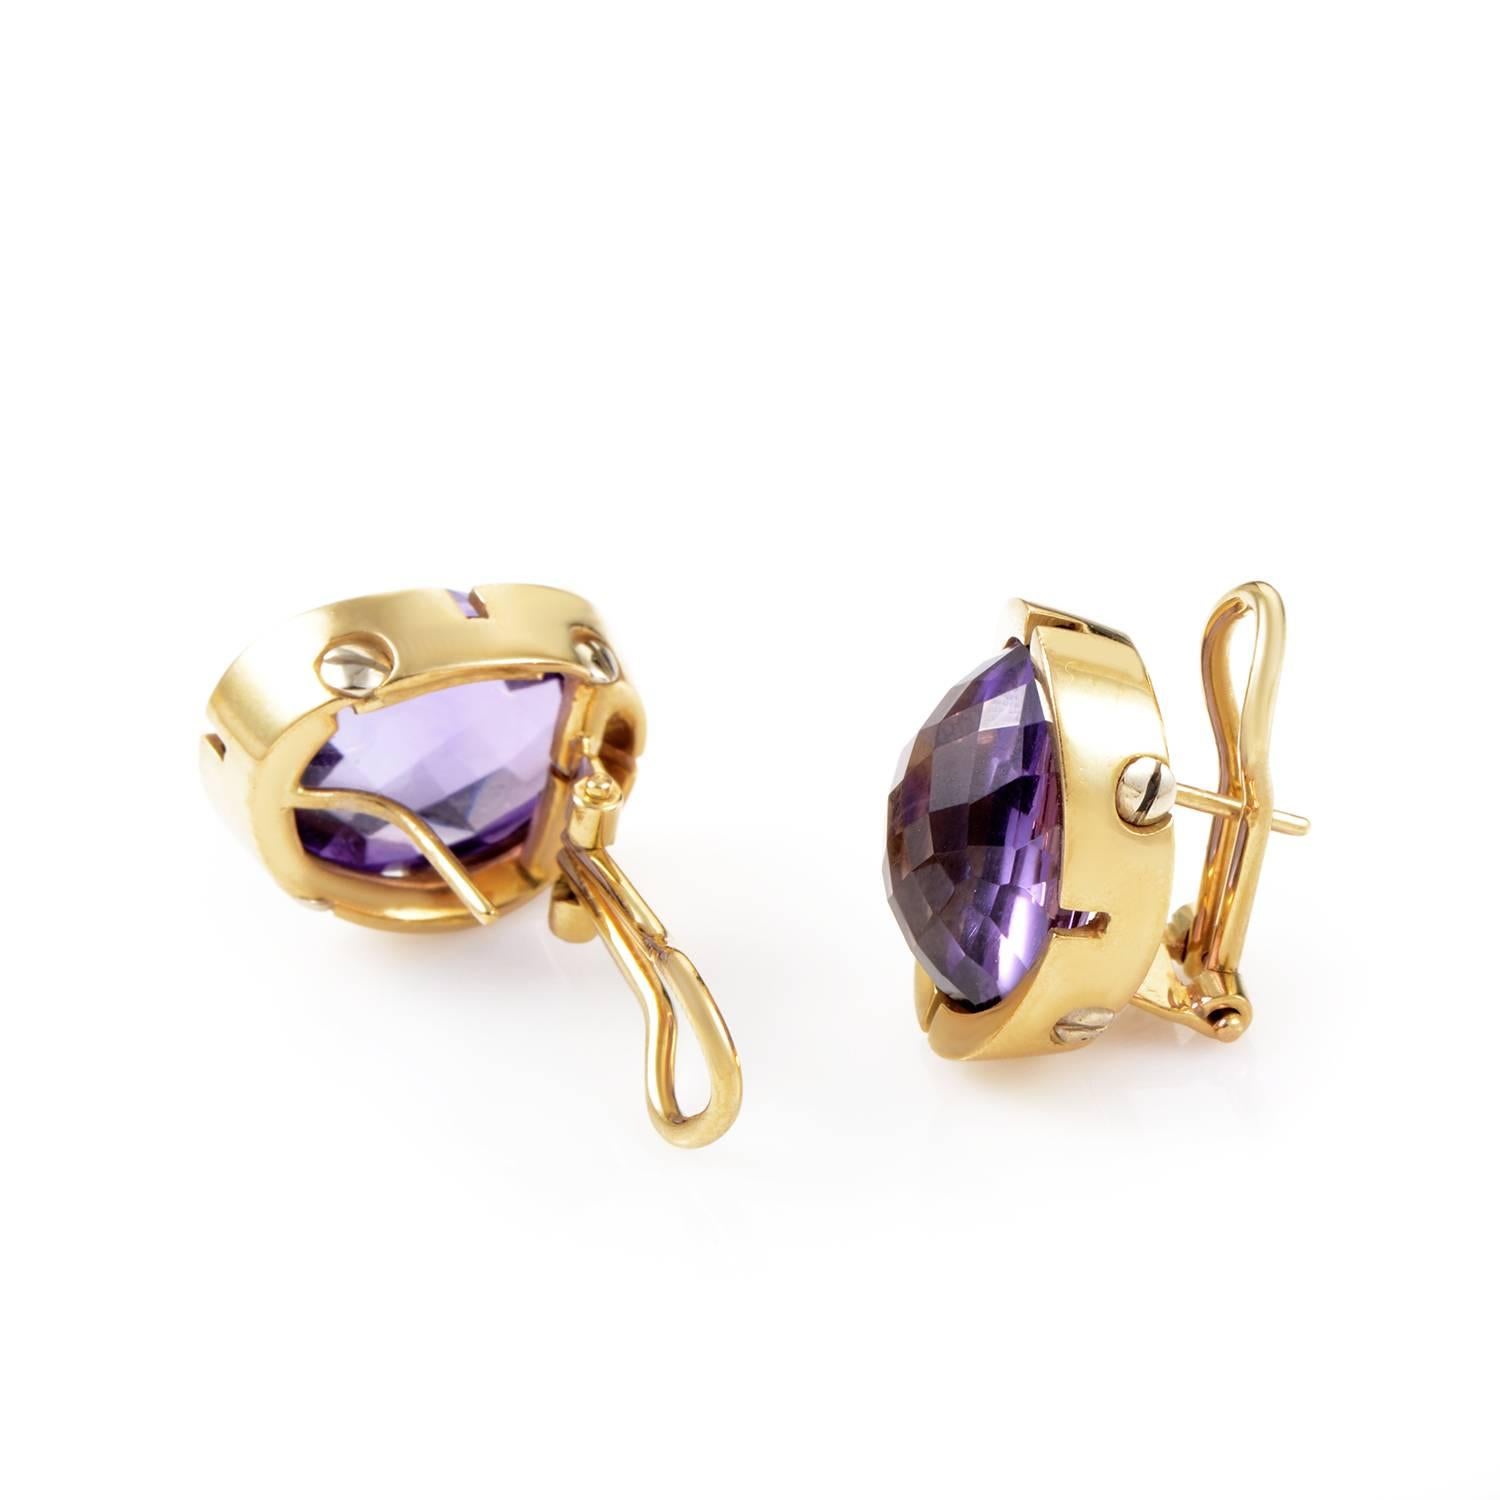 Catching your eye with their wonderfully bright sparkle and captivating you with the mesmerizing play of light upon their exquisitely cut surface, the amethyst stones set a delightful tone in these feminine 18K yellow gold earrings from Calderoni.